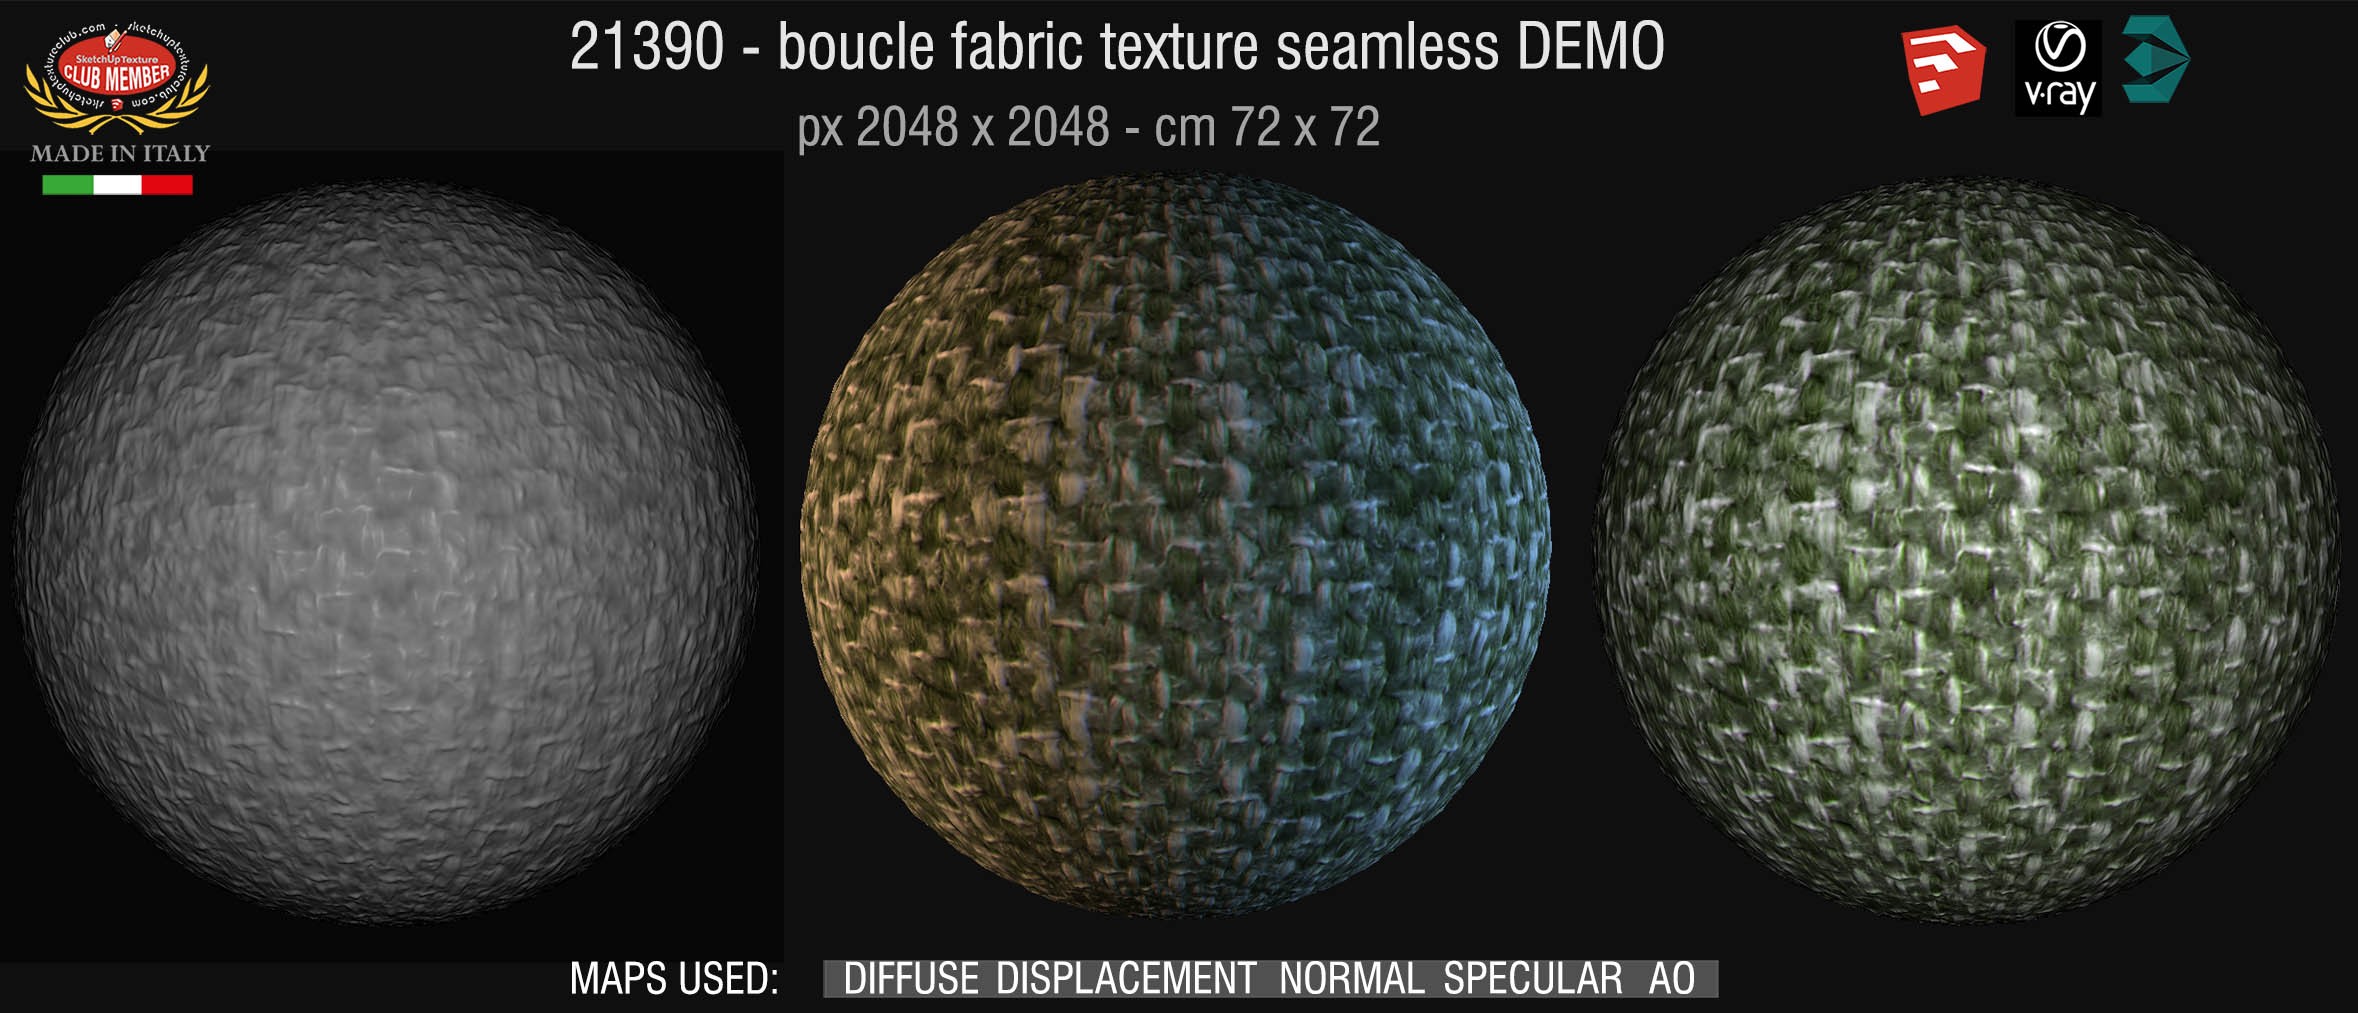 21390 boucle fabric texture-seamless + maps DEMO